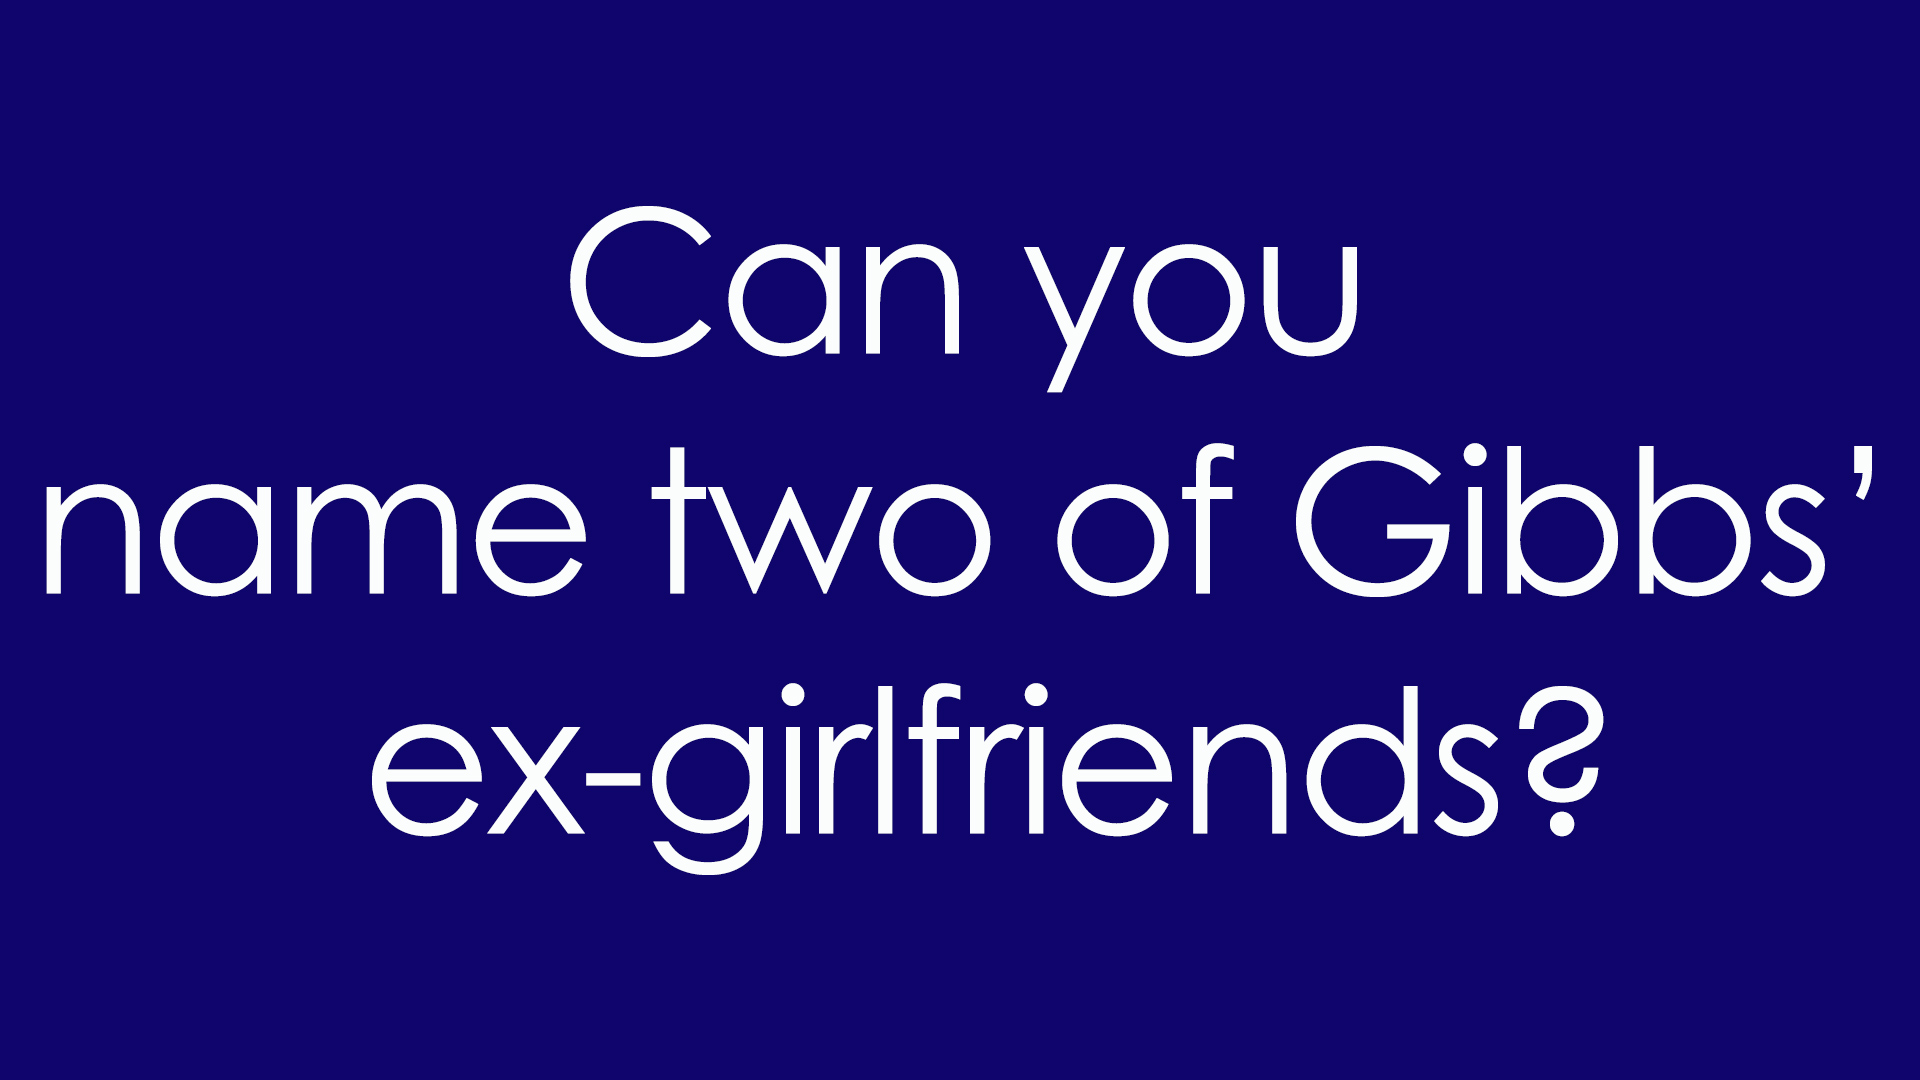 9. Can you name two of Gibbs' ex-girlfriends?